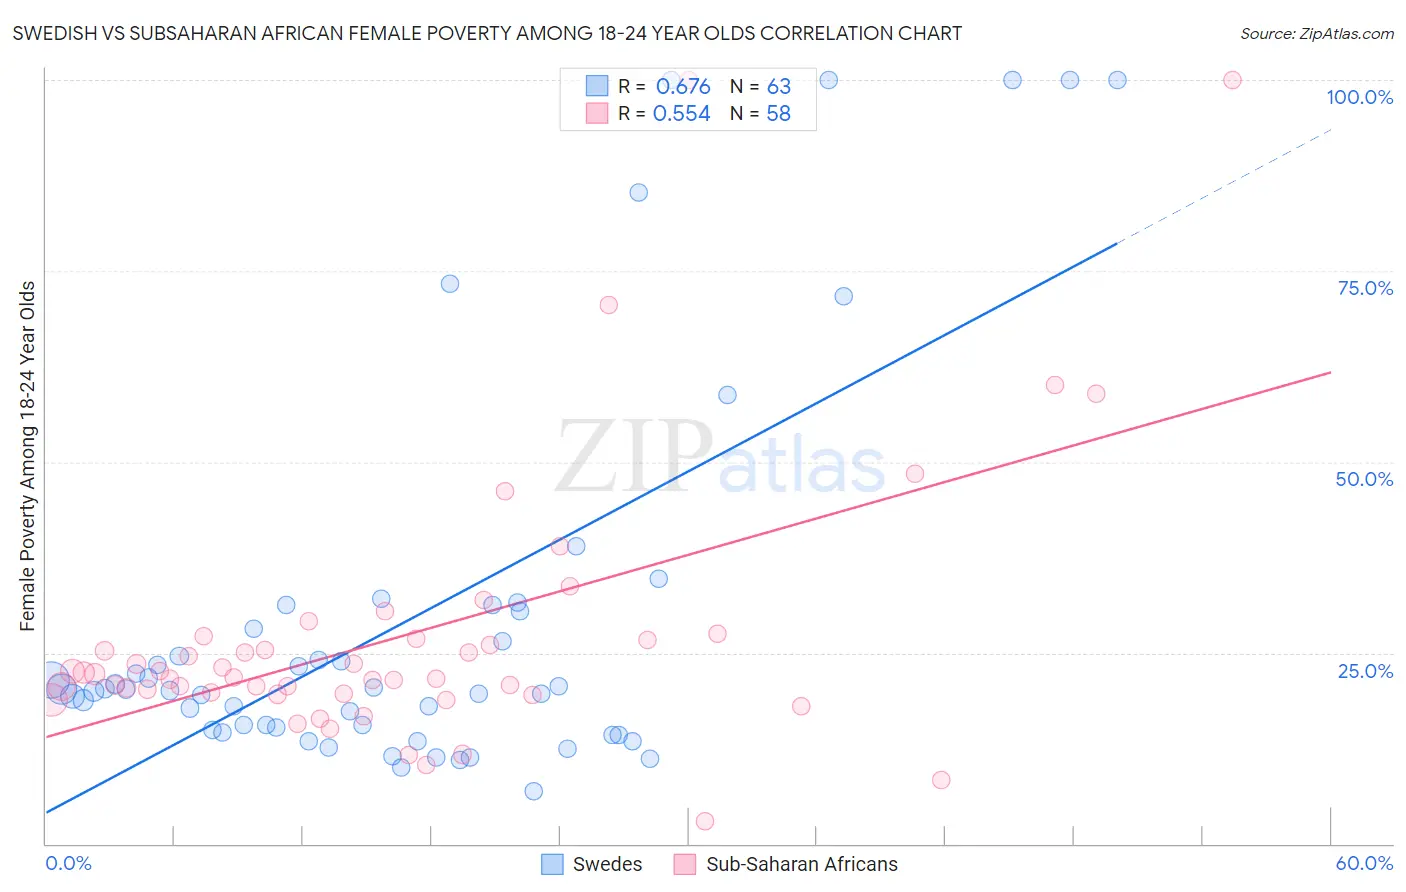 Swedish vs Subsaharan African Female Poverty Among 18-24 Year Olds